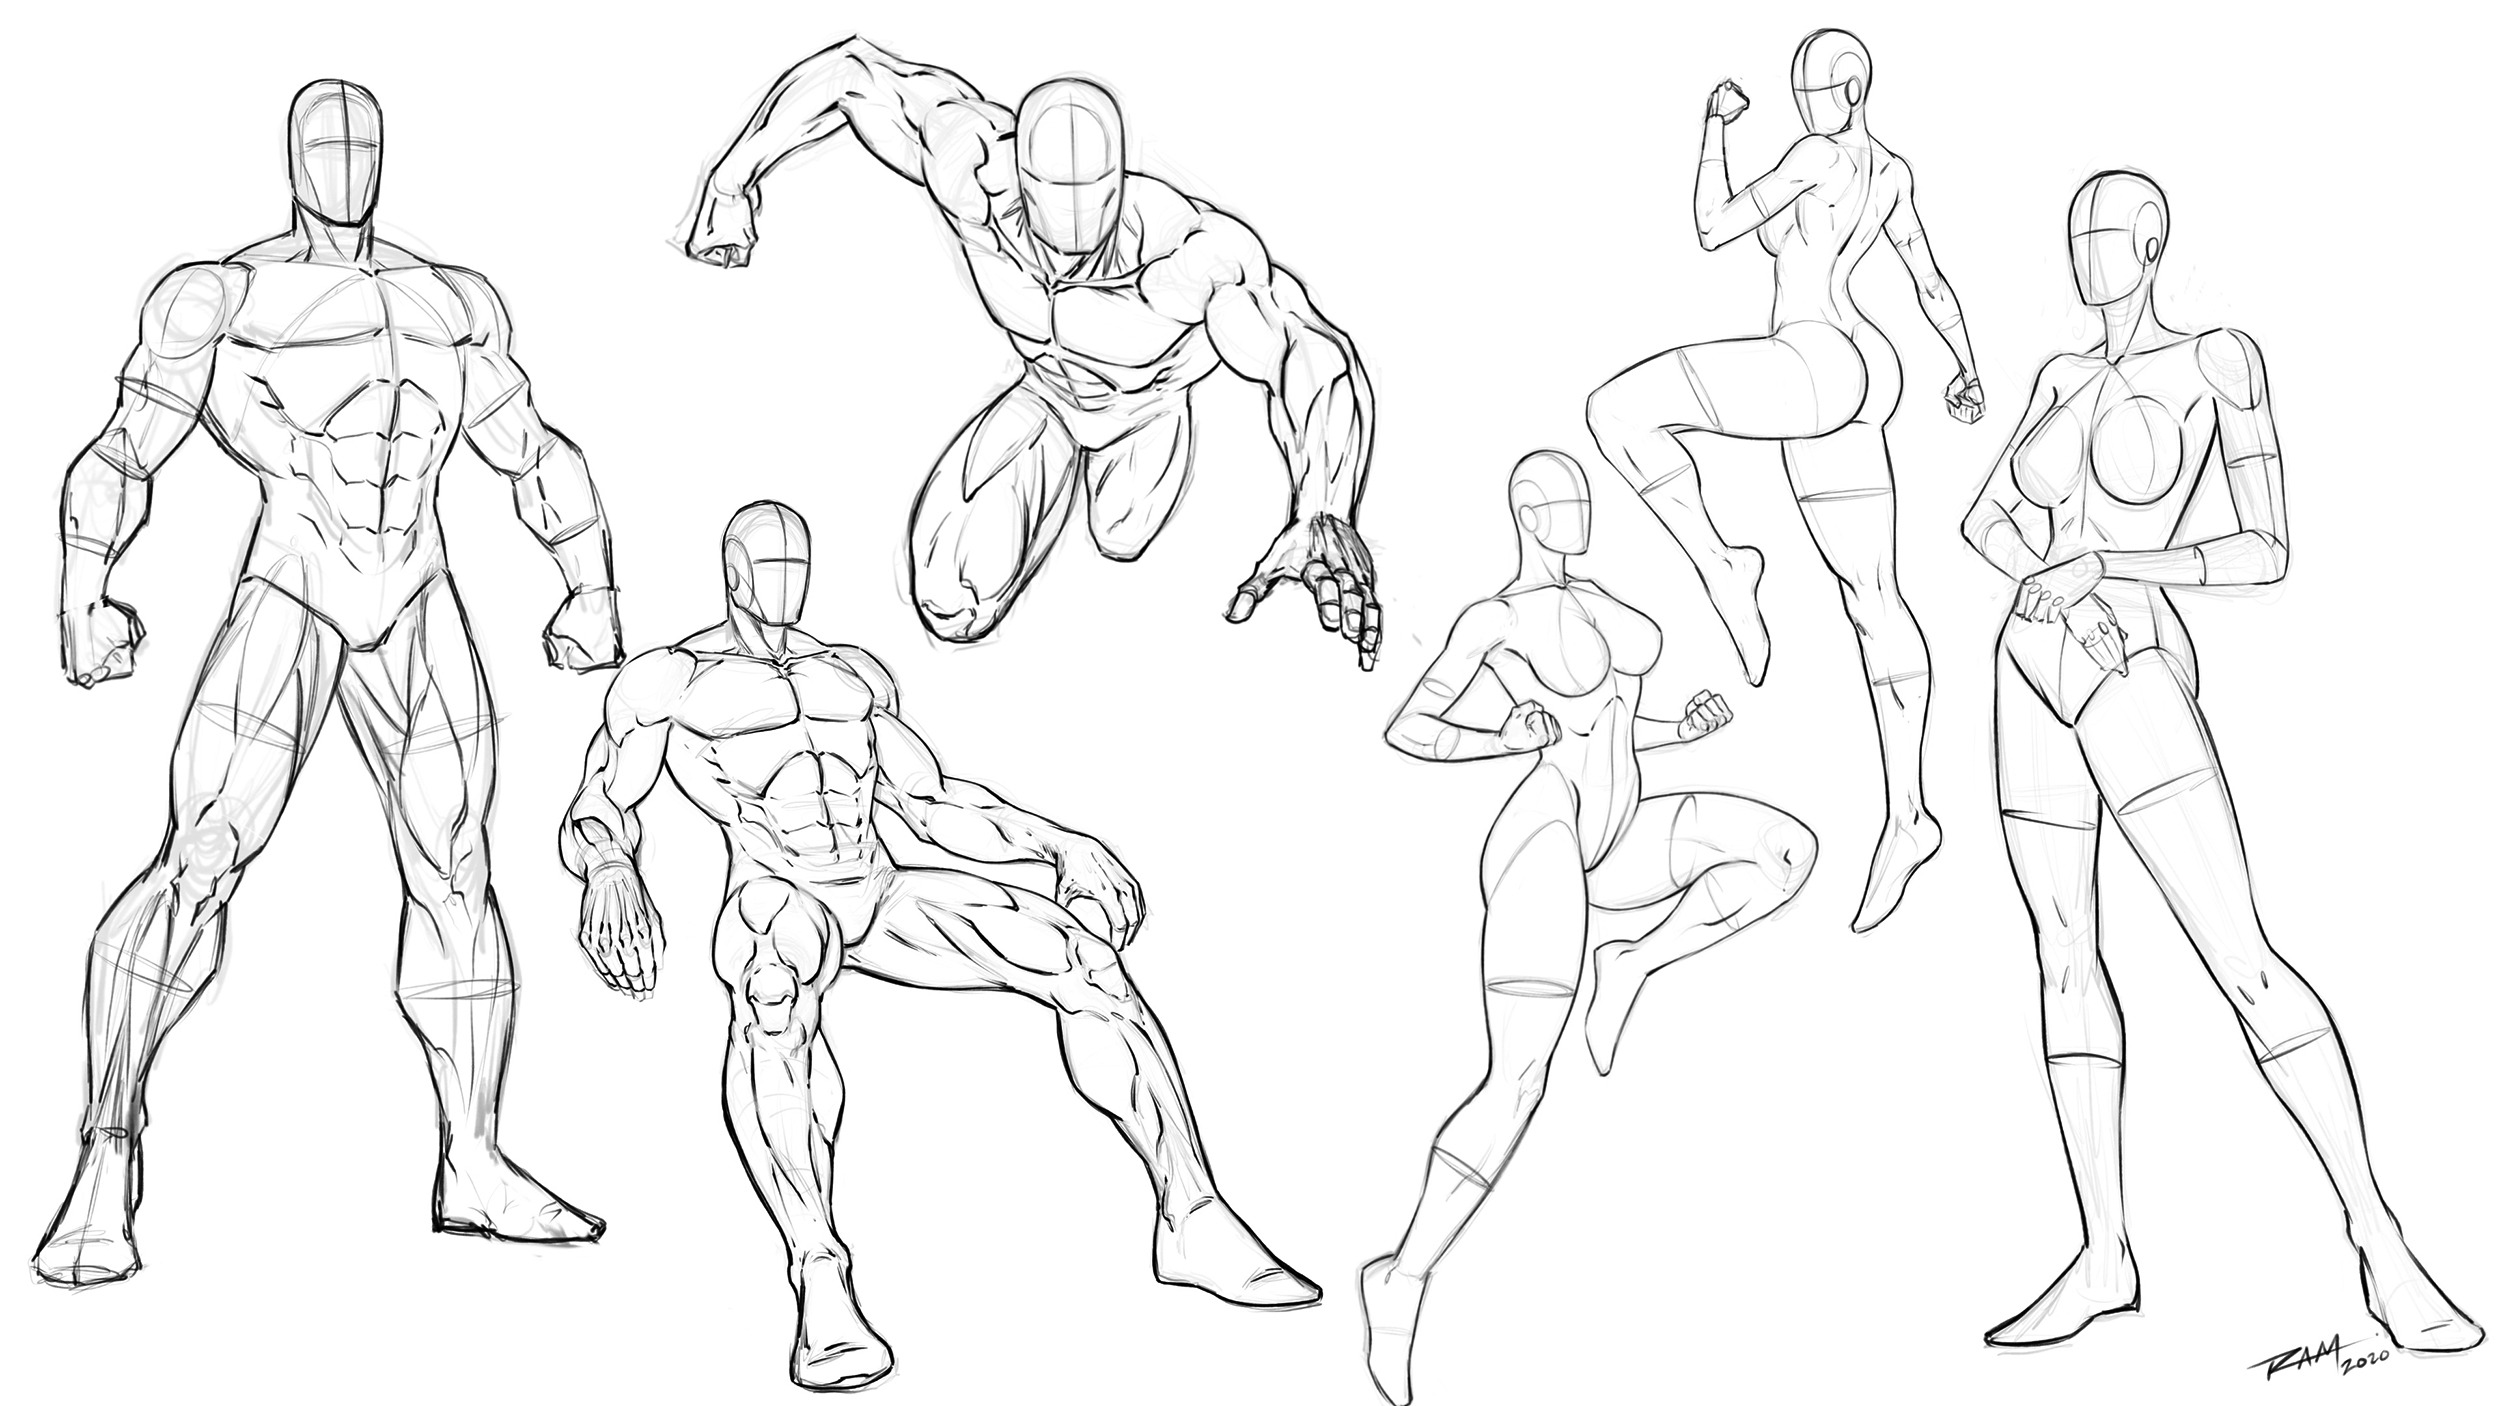 How to Draw Dynamic Poses for Comics | Robert Marzullo | Skillshare